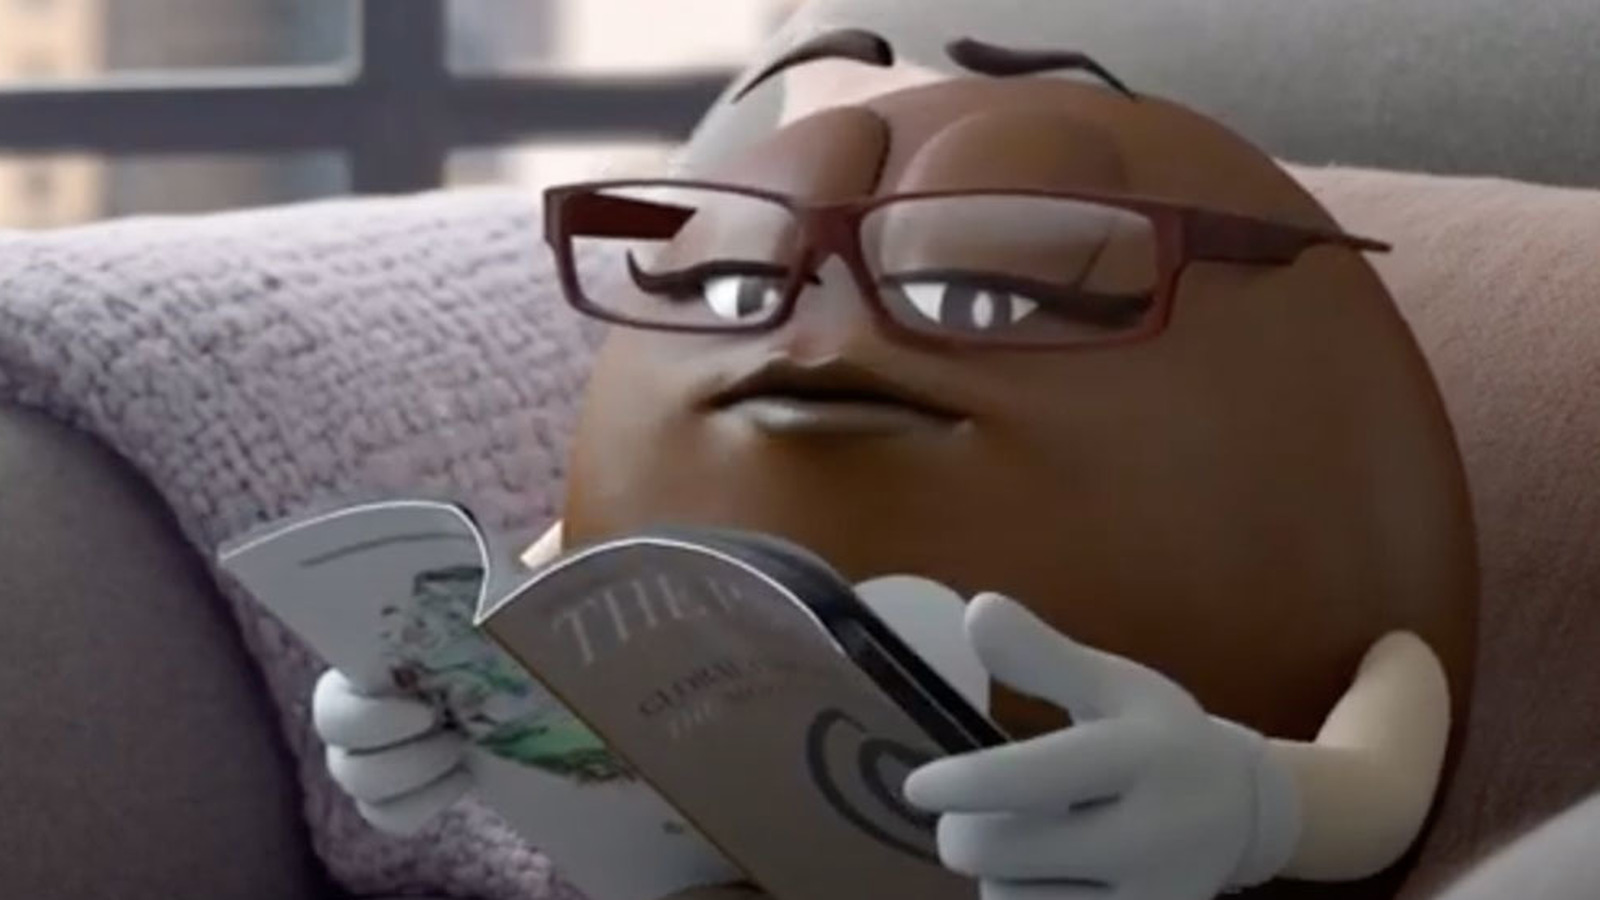 M&M's To Introduce Ms. Brown Character During First Quarter of Super Bowl